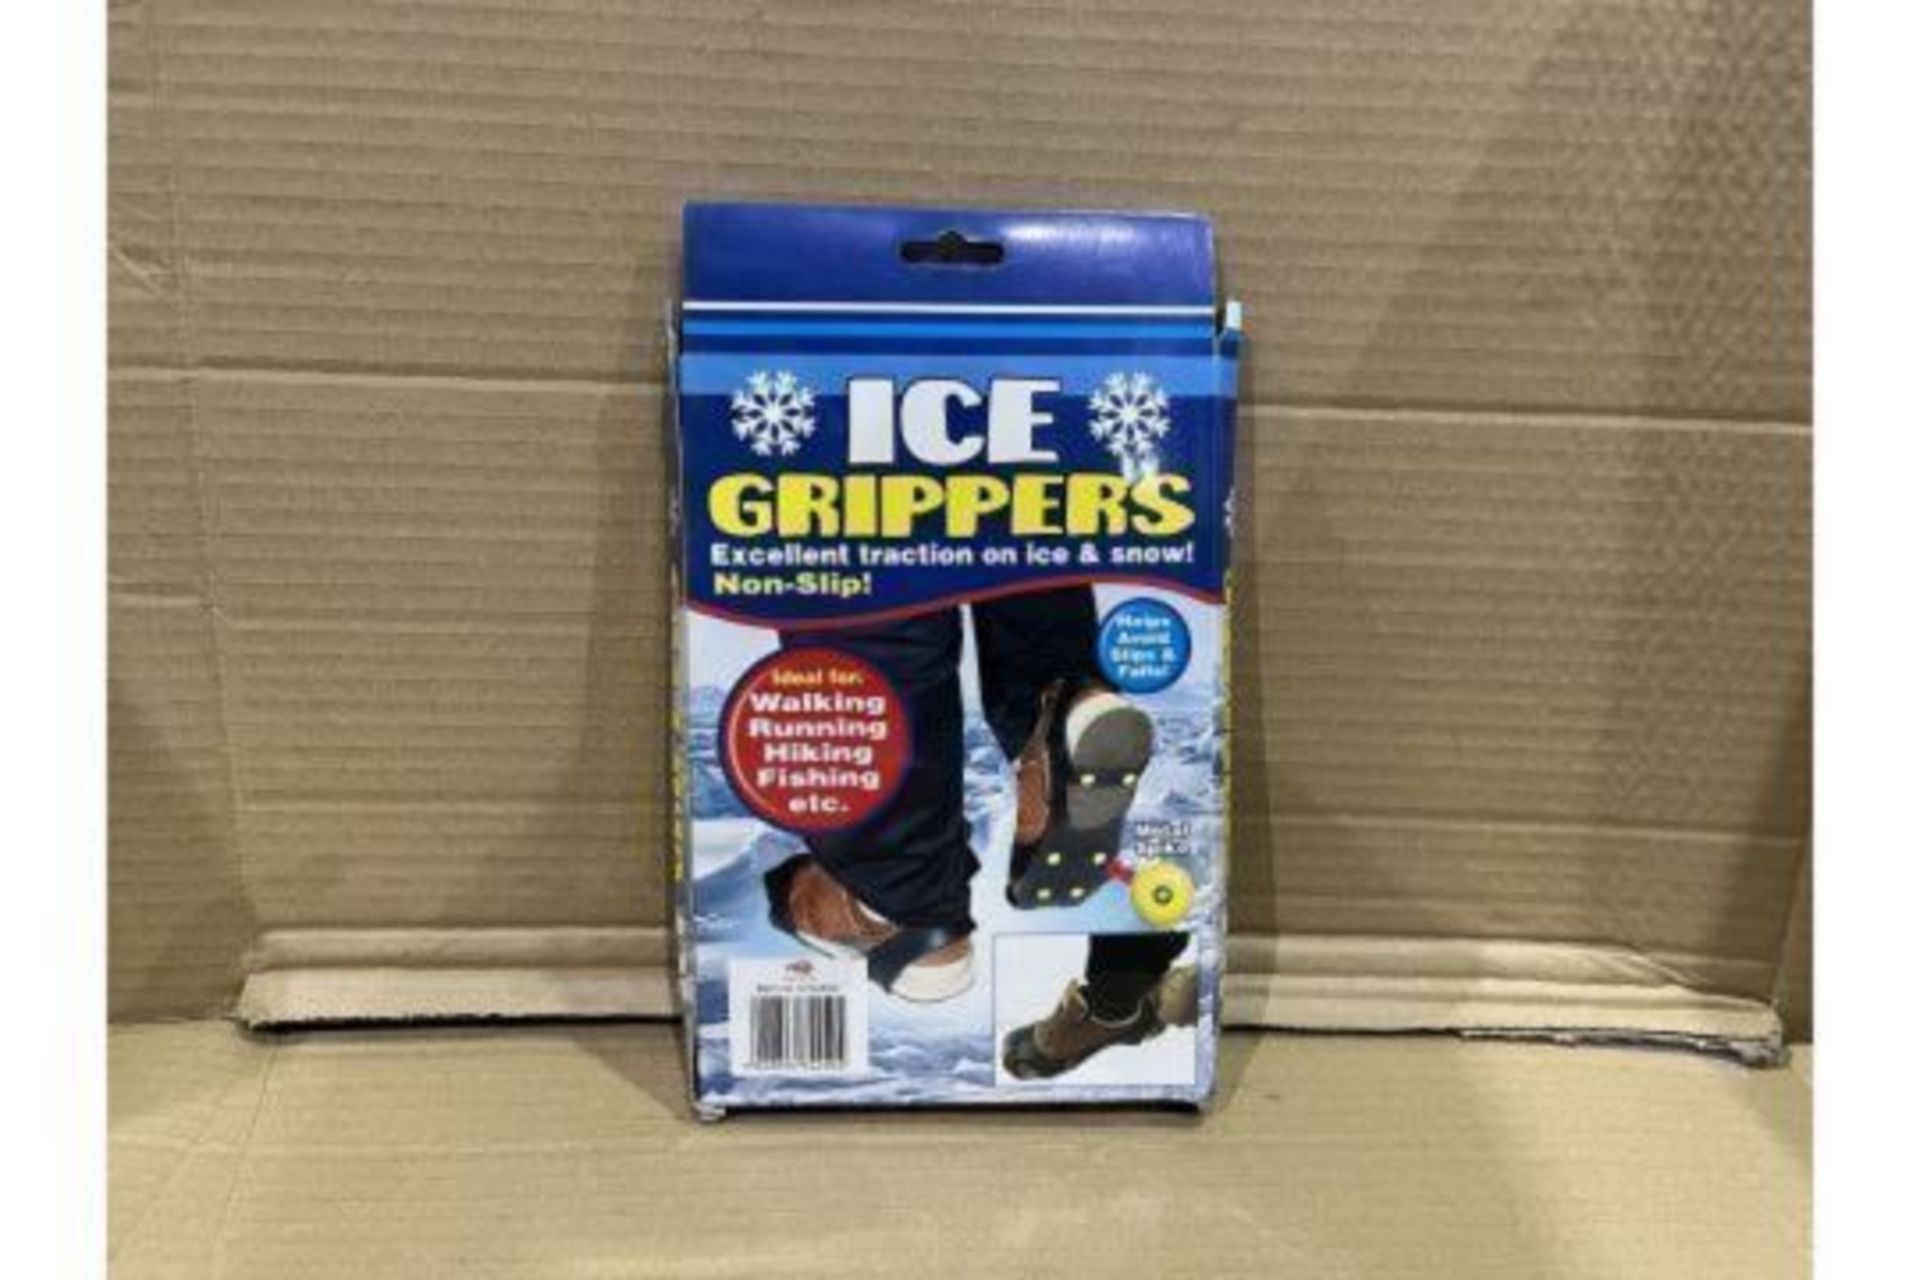 48 X BRAND NEW NON SLIP ICE GRIPPERS PERFECT FOR THE WINTER WEATHER, WALKERS/HIKERS ETC R10-7